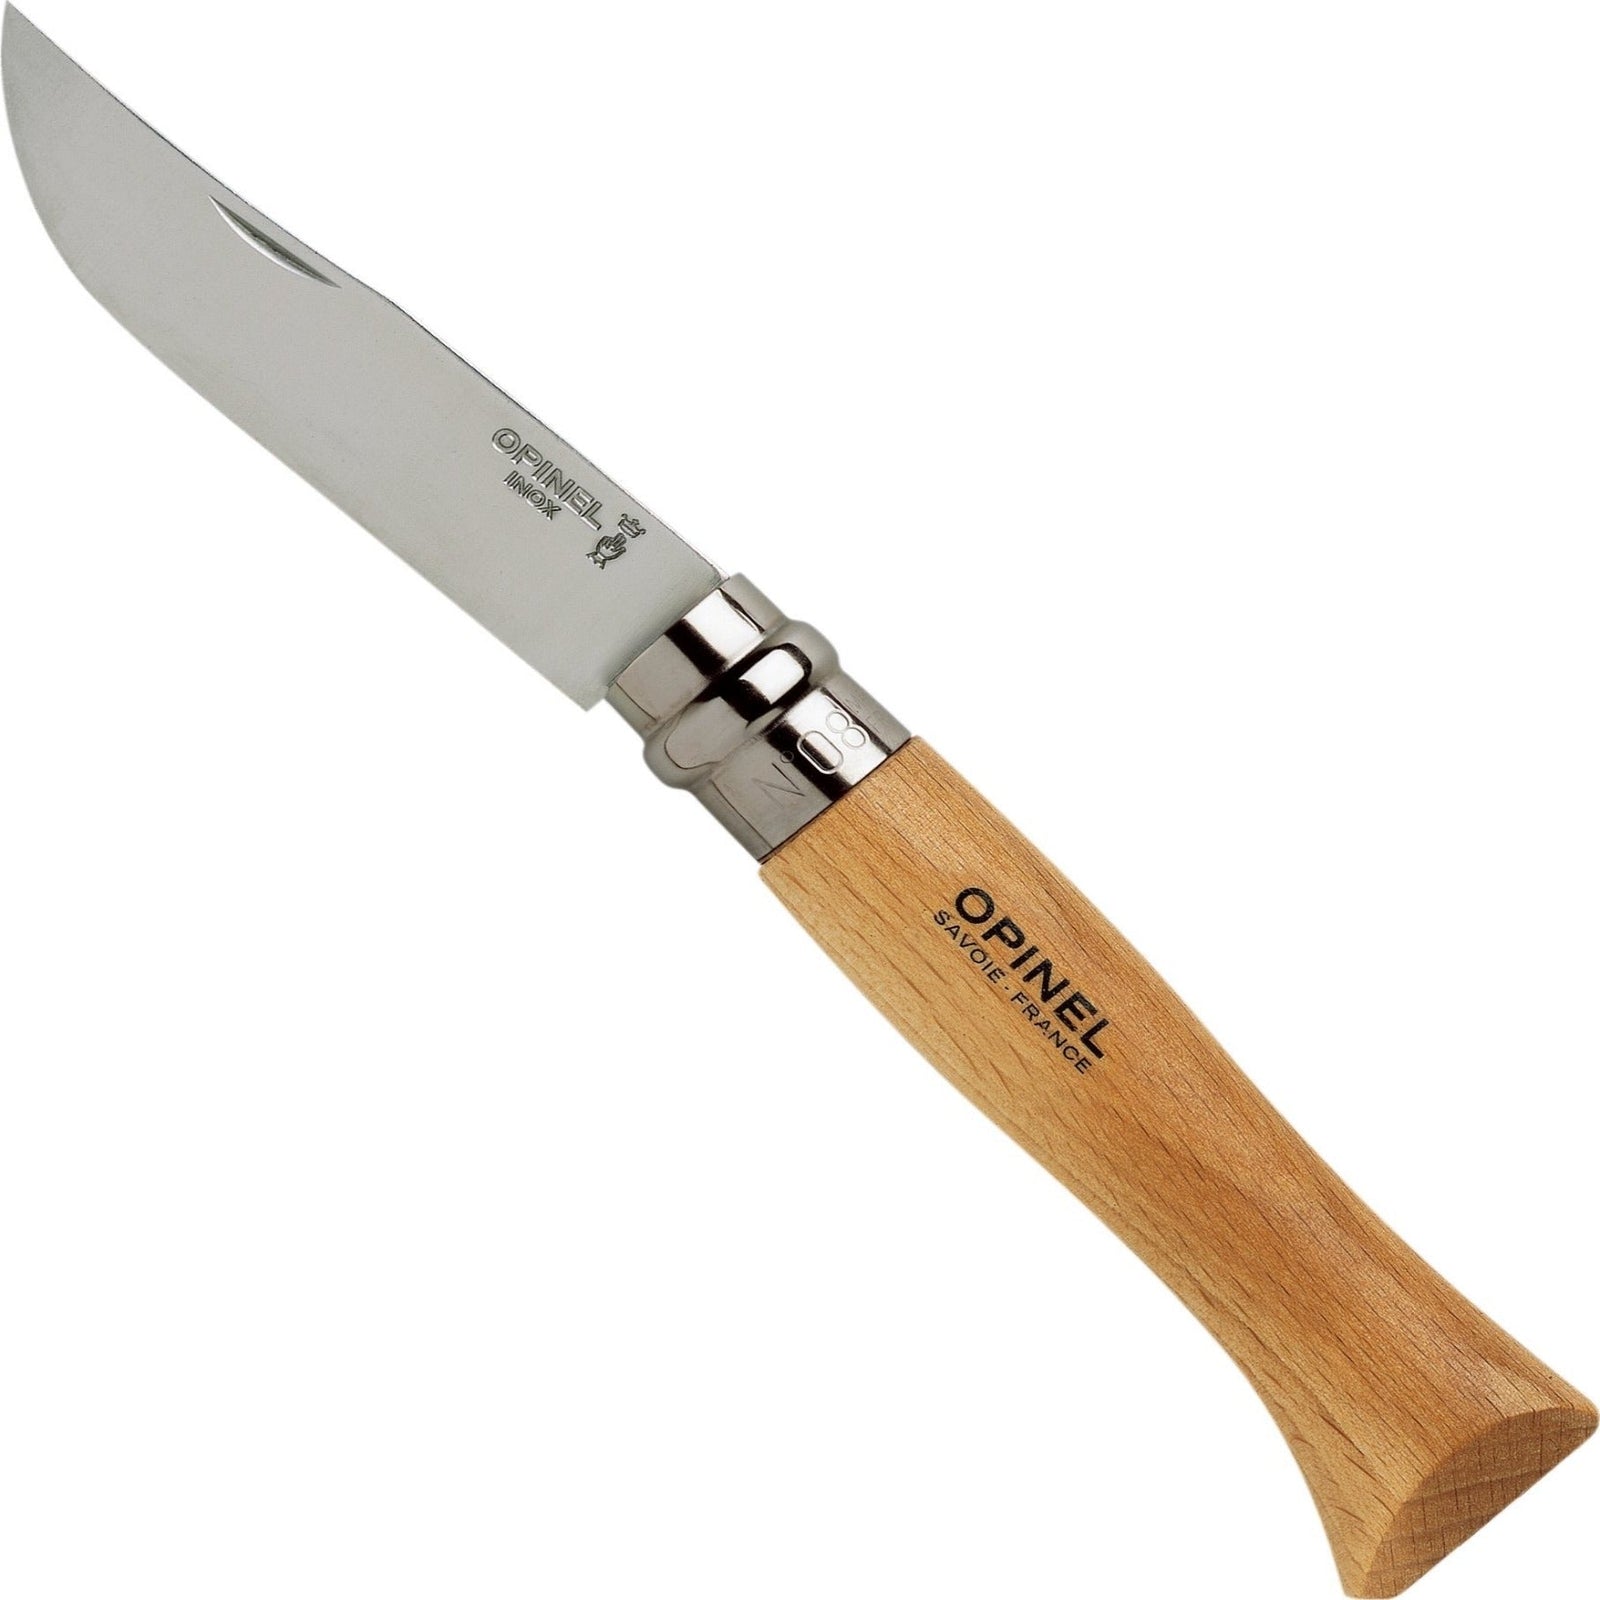 Opinel No.12 Carbon Steel Folding Saw with Leather Case